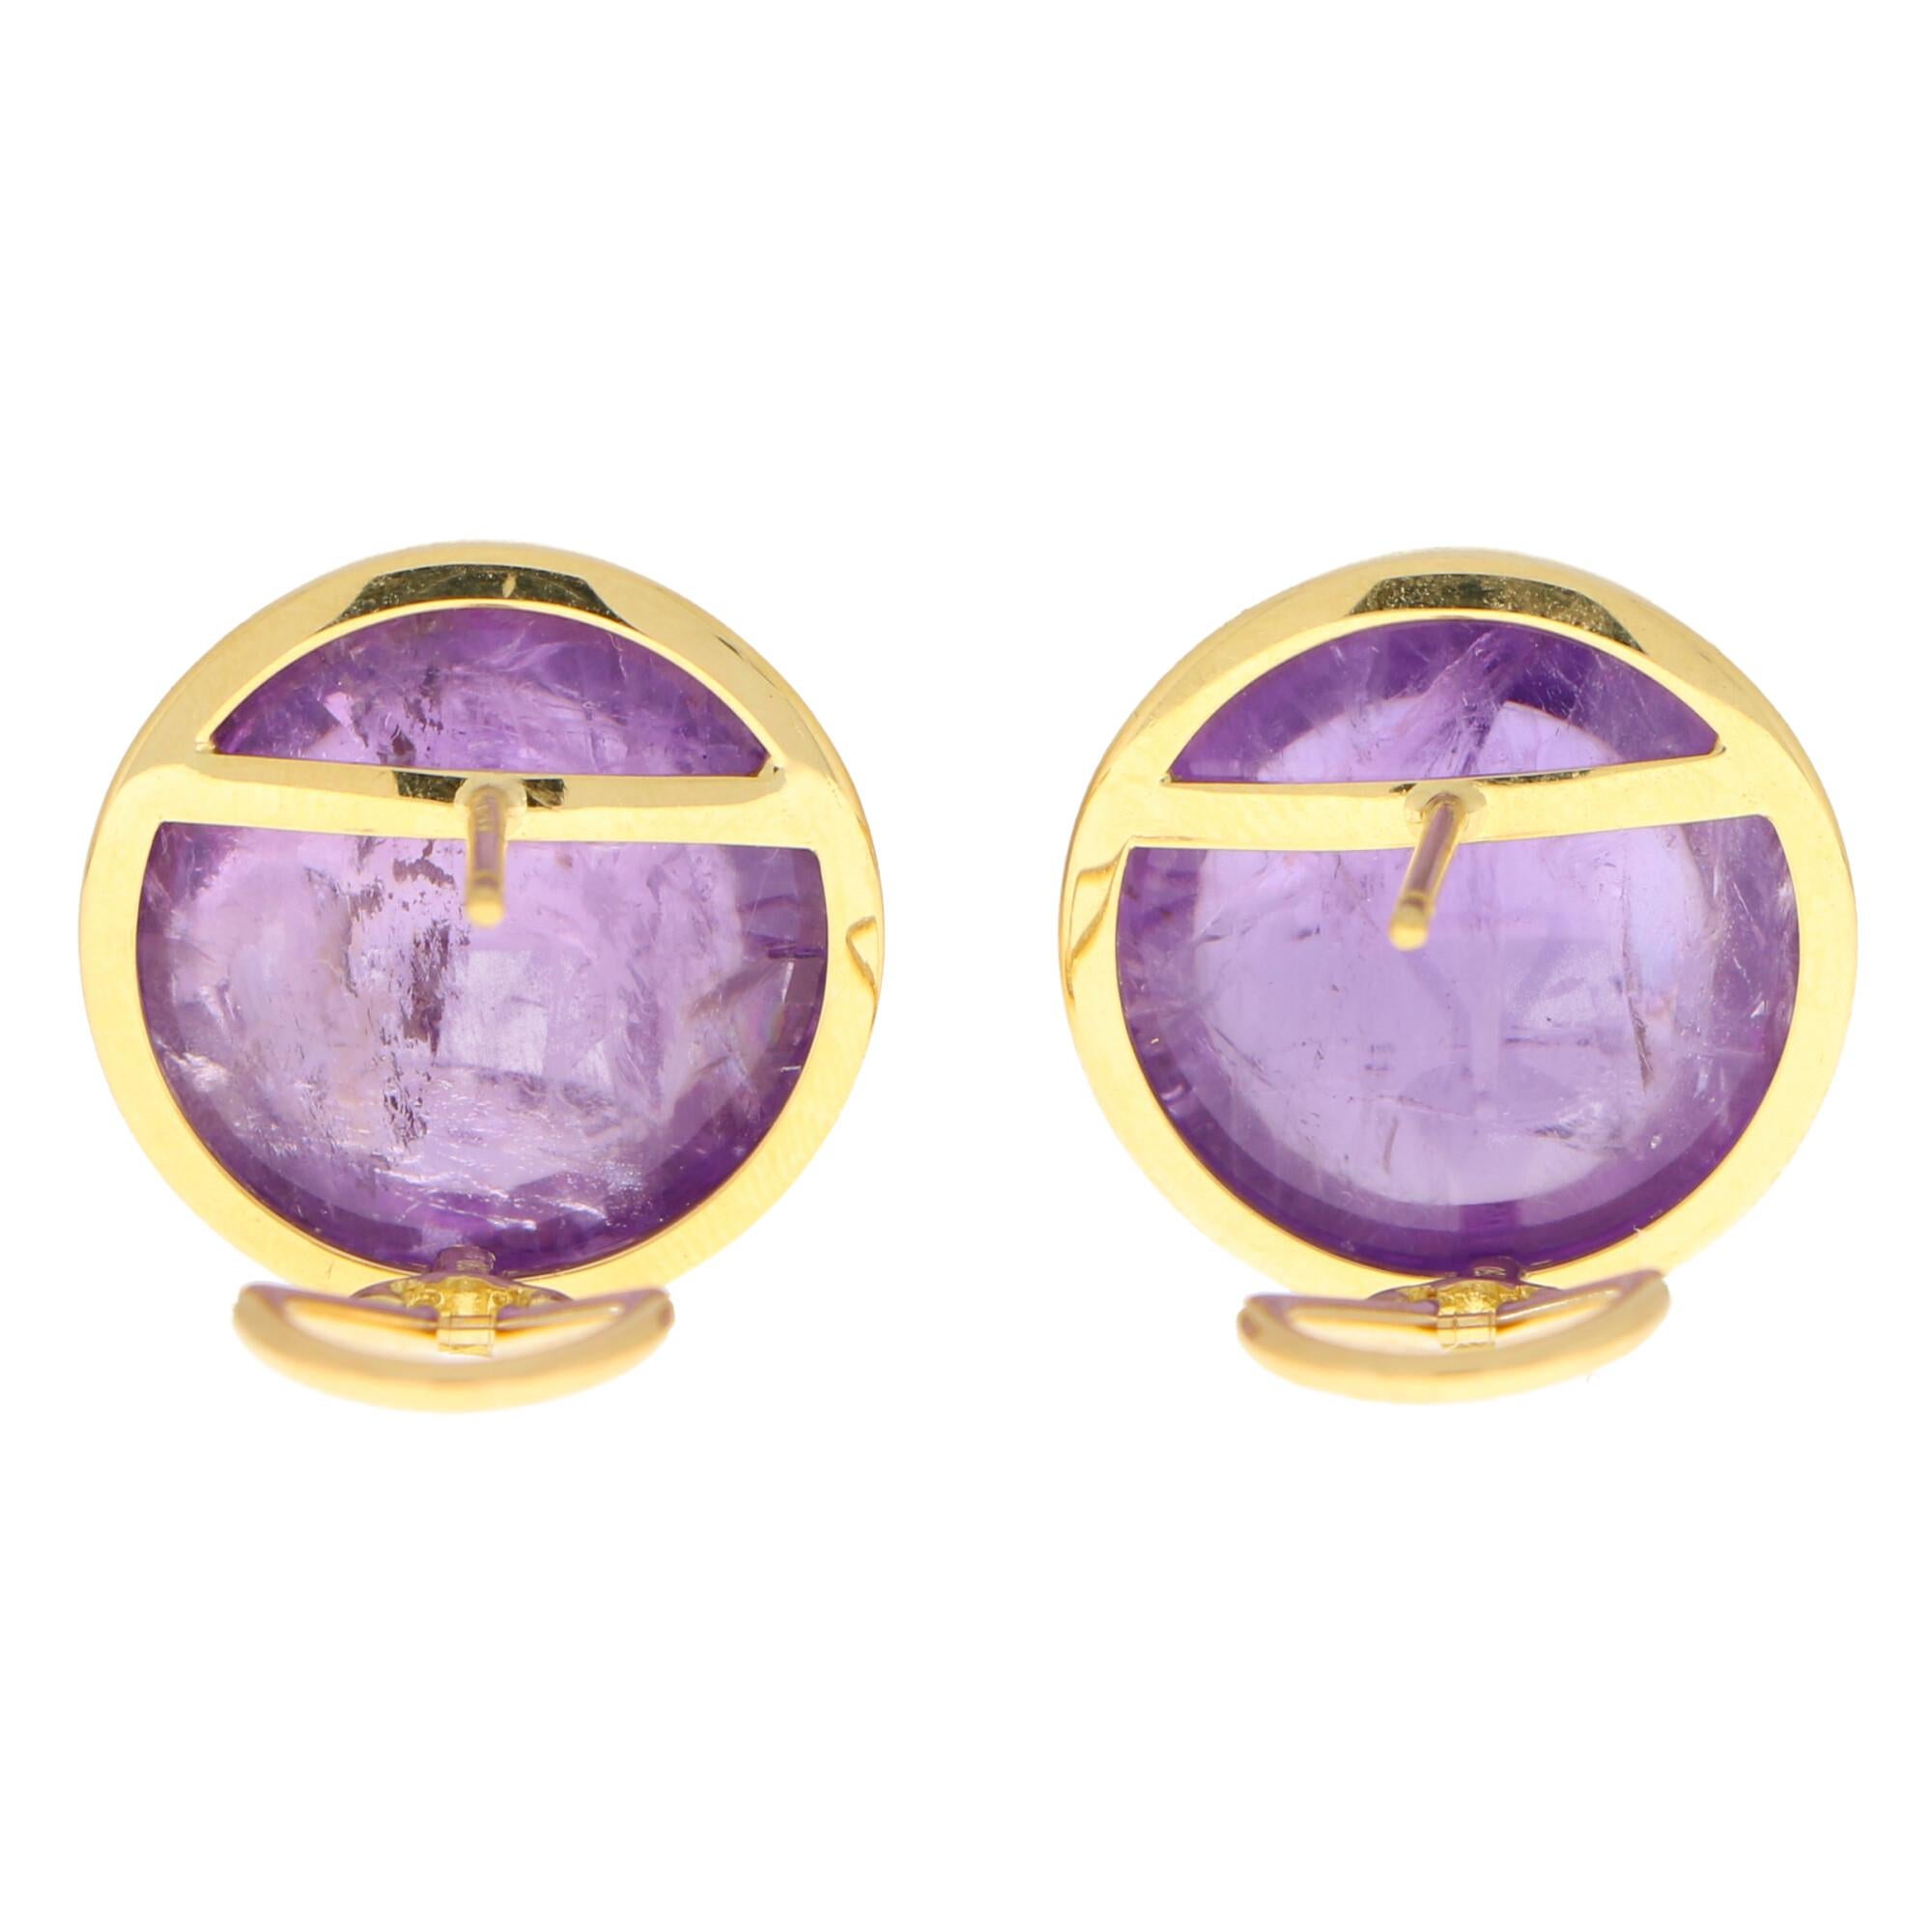 Cabochon Large Purple Amethyst Dome Earrings Set in 18k Yellow Gold